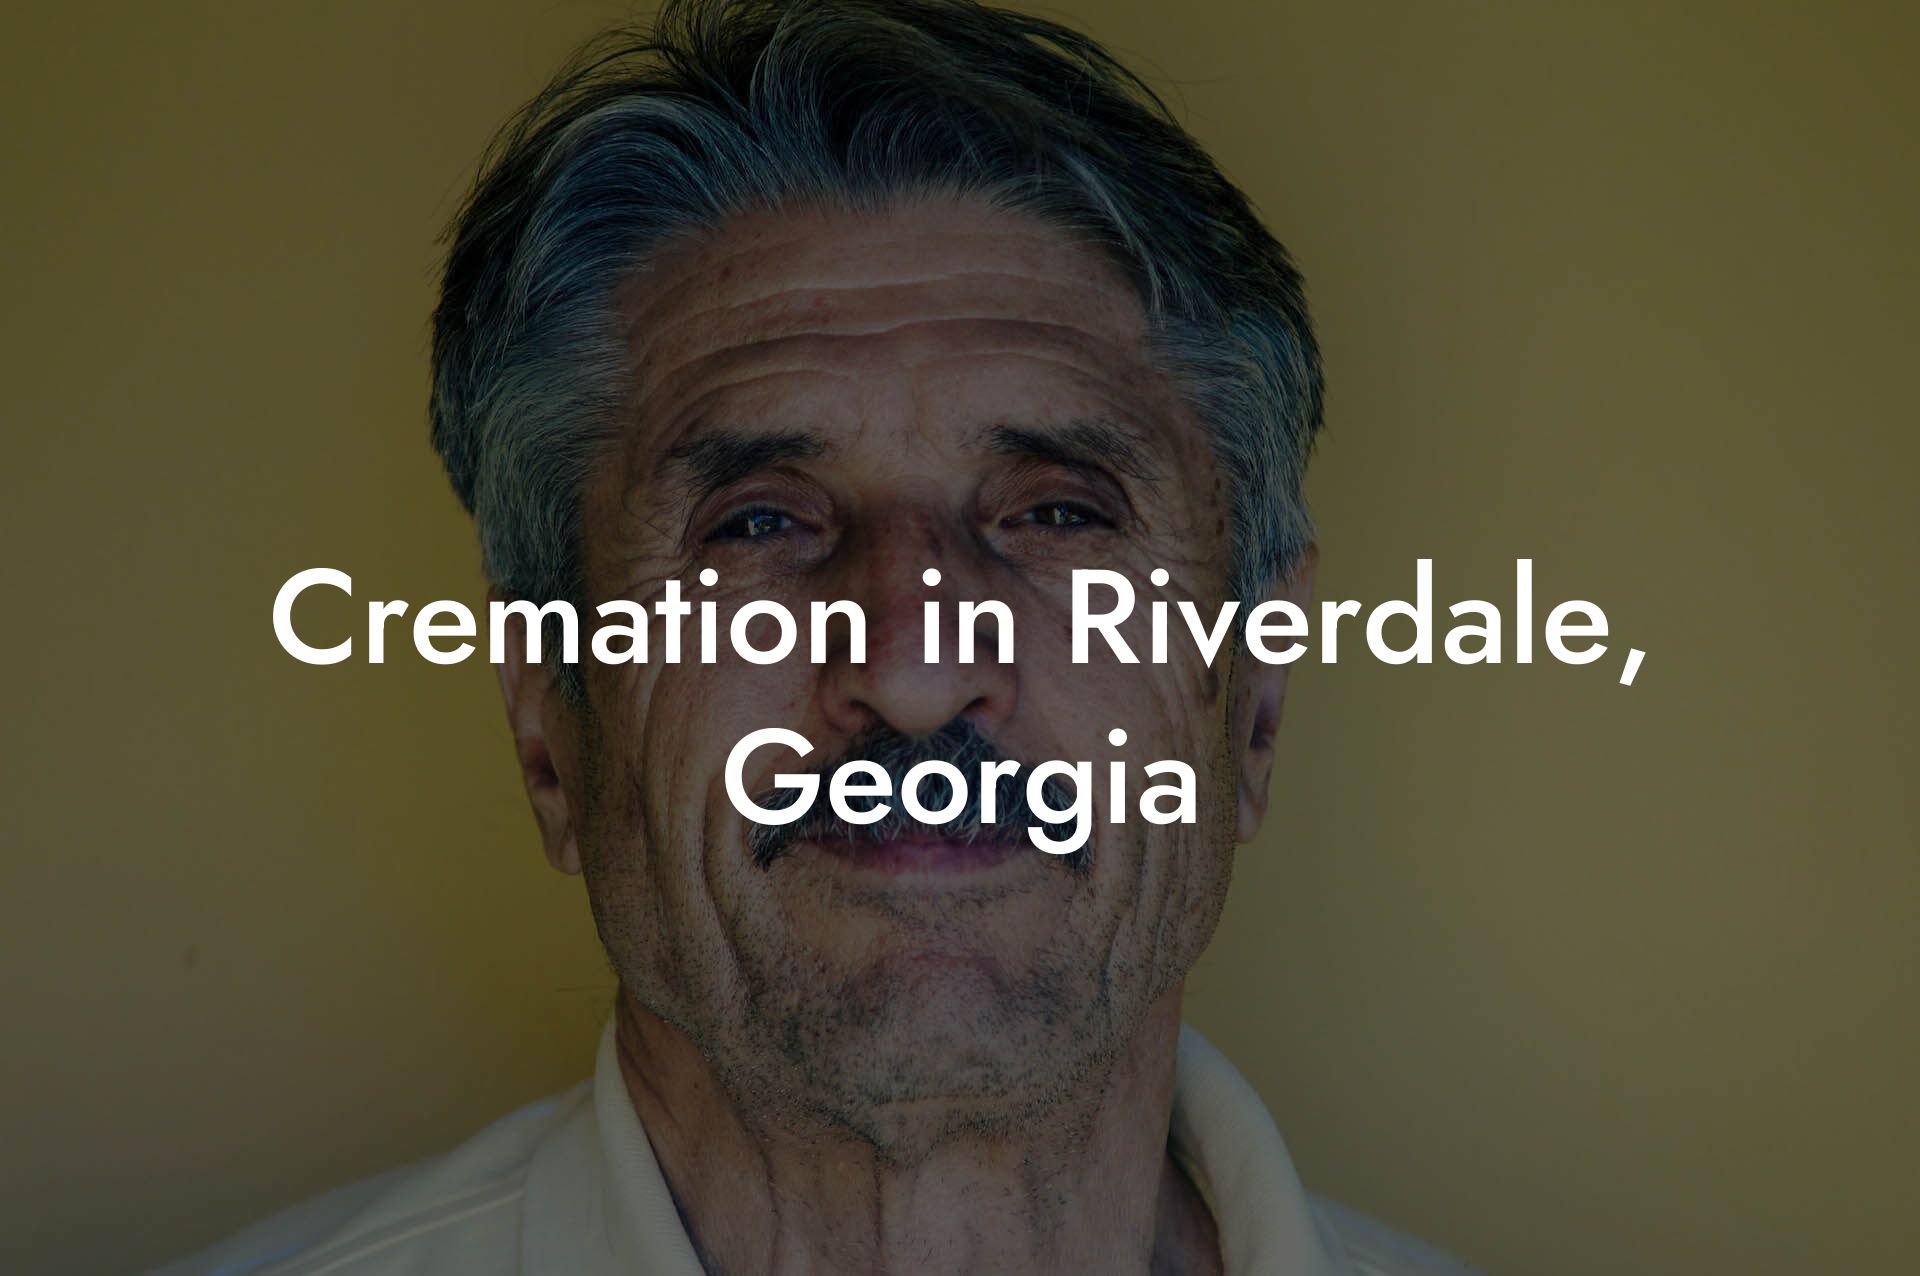 Cremation in Riverdale, Georgia